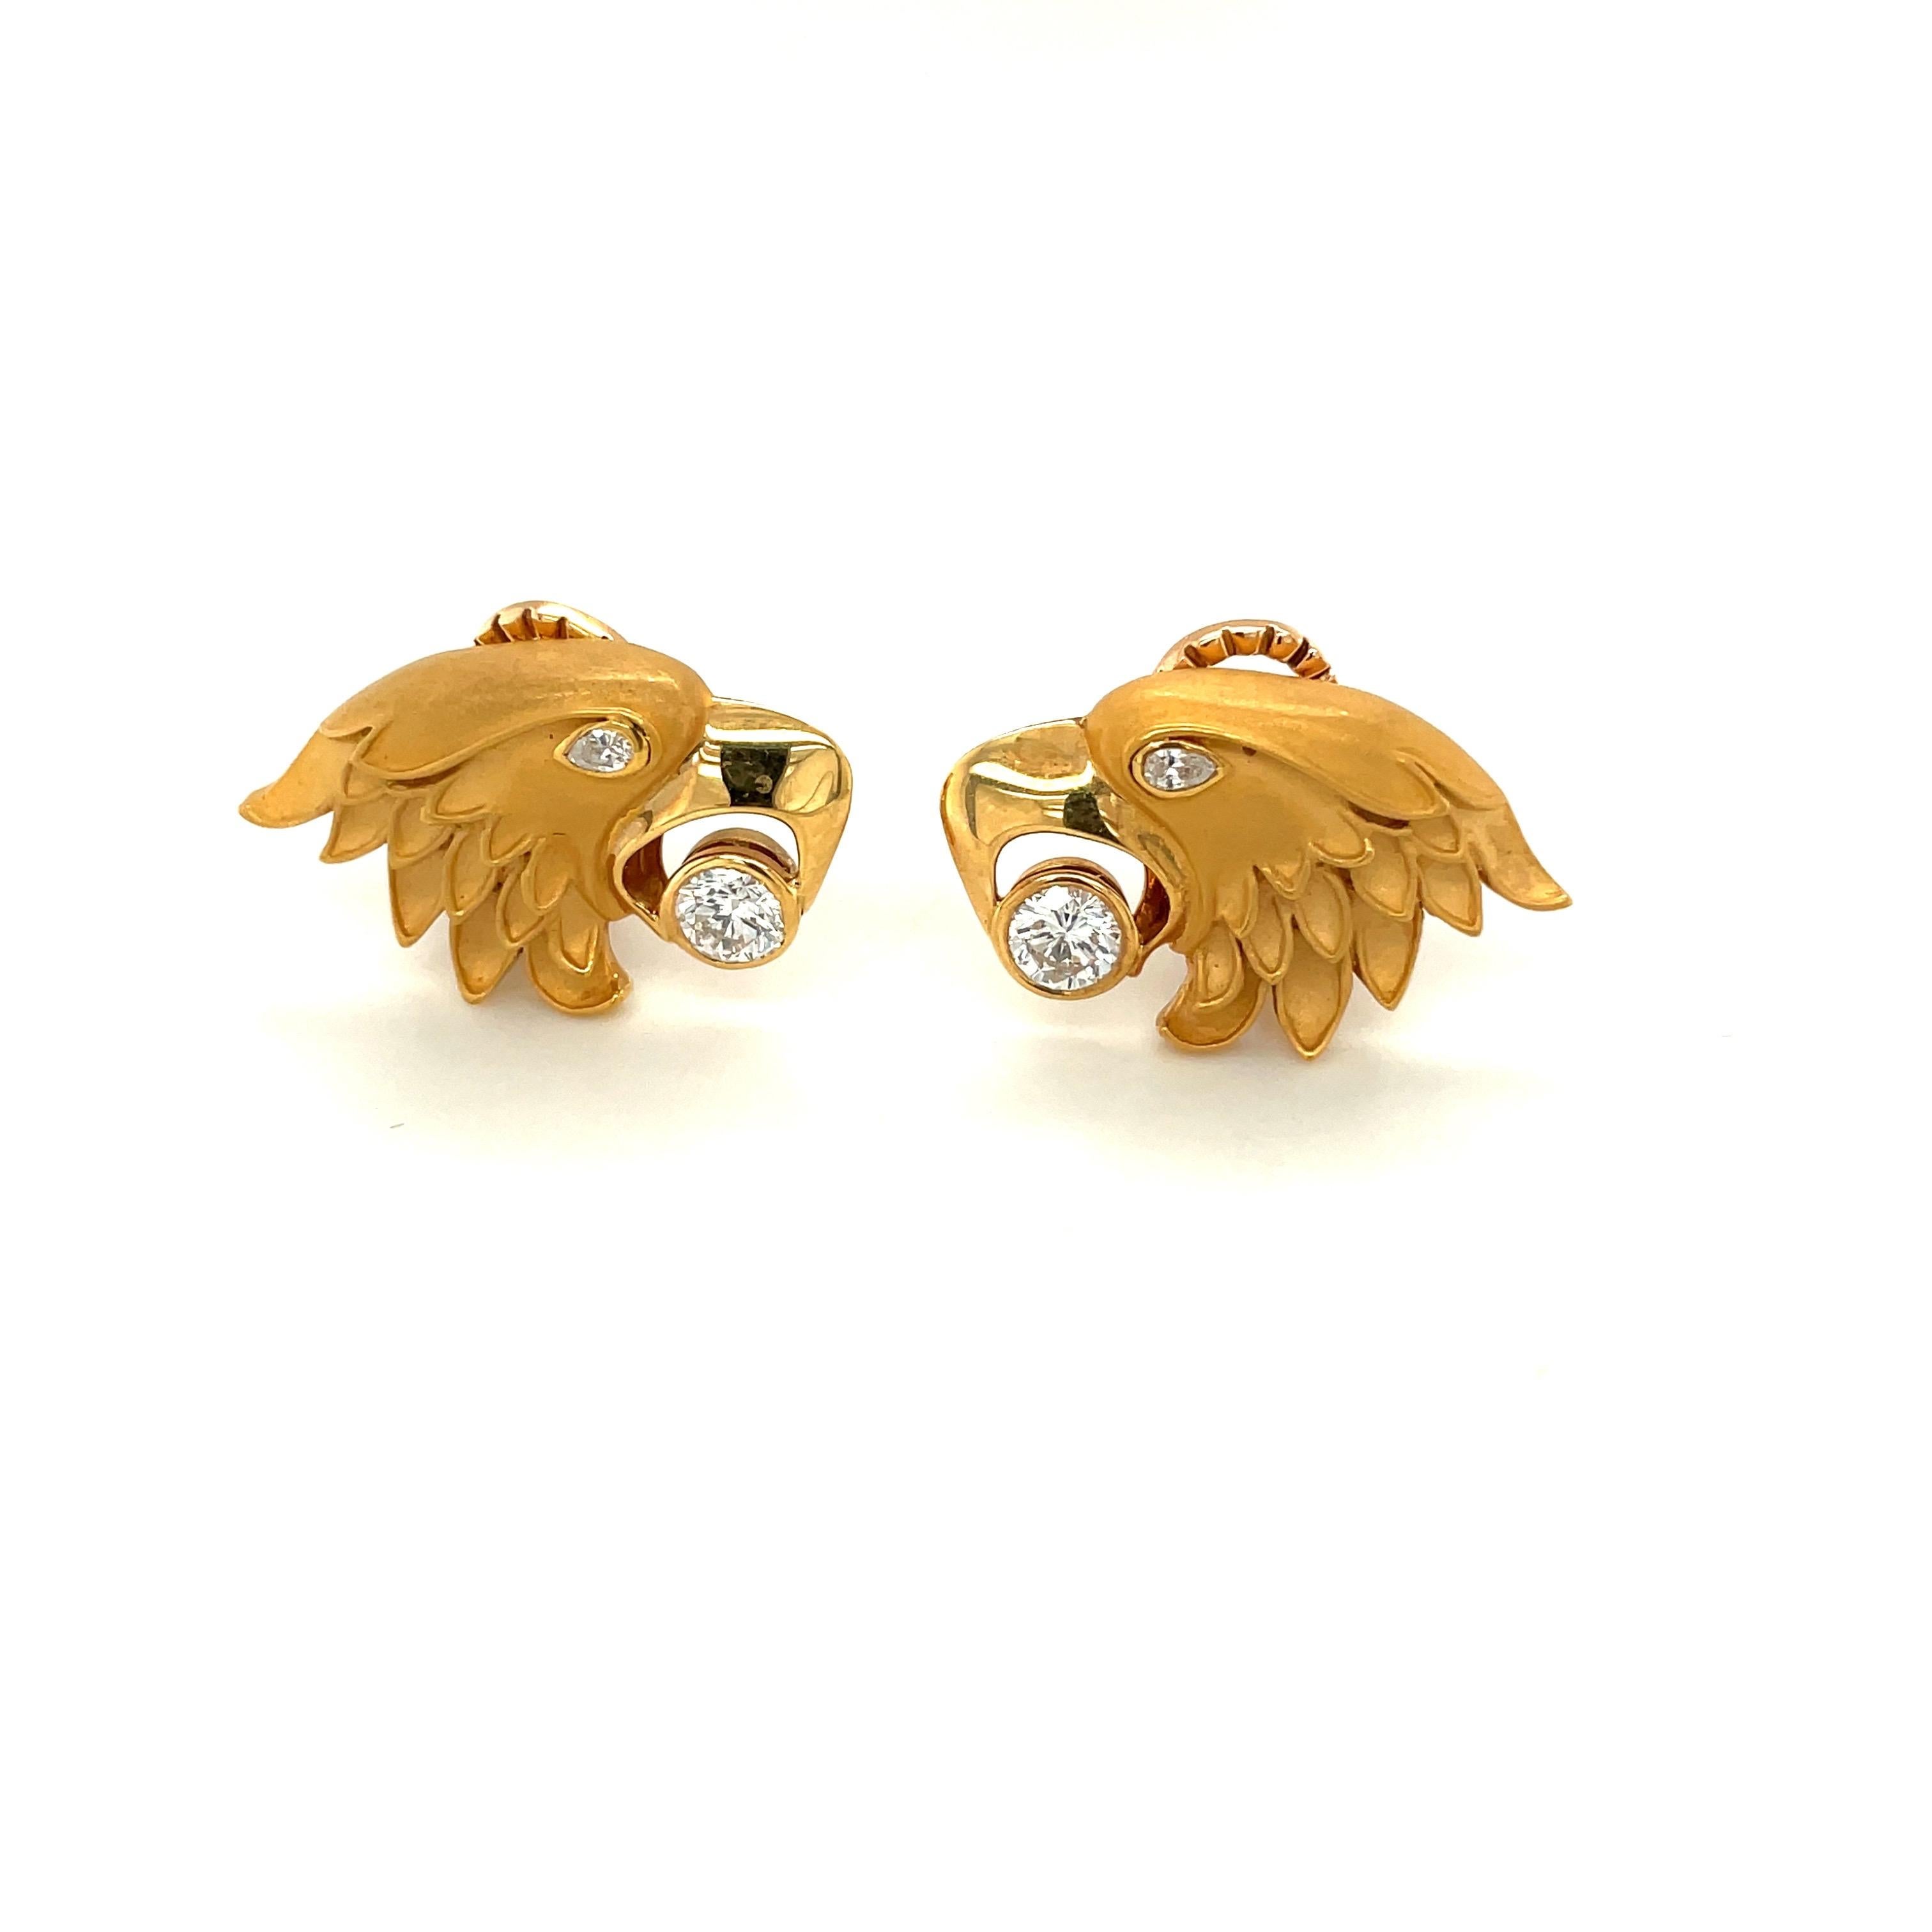 Carrera Y Carrera has built its famous name on figurative designs, an obsession with surface finishes, and a compelling way of seeing beauty in art and nature. These 18 karat yellow gold earrings are the perfect example of Carrera's iconic designs.